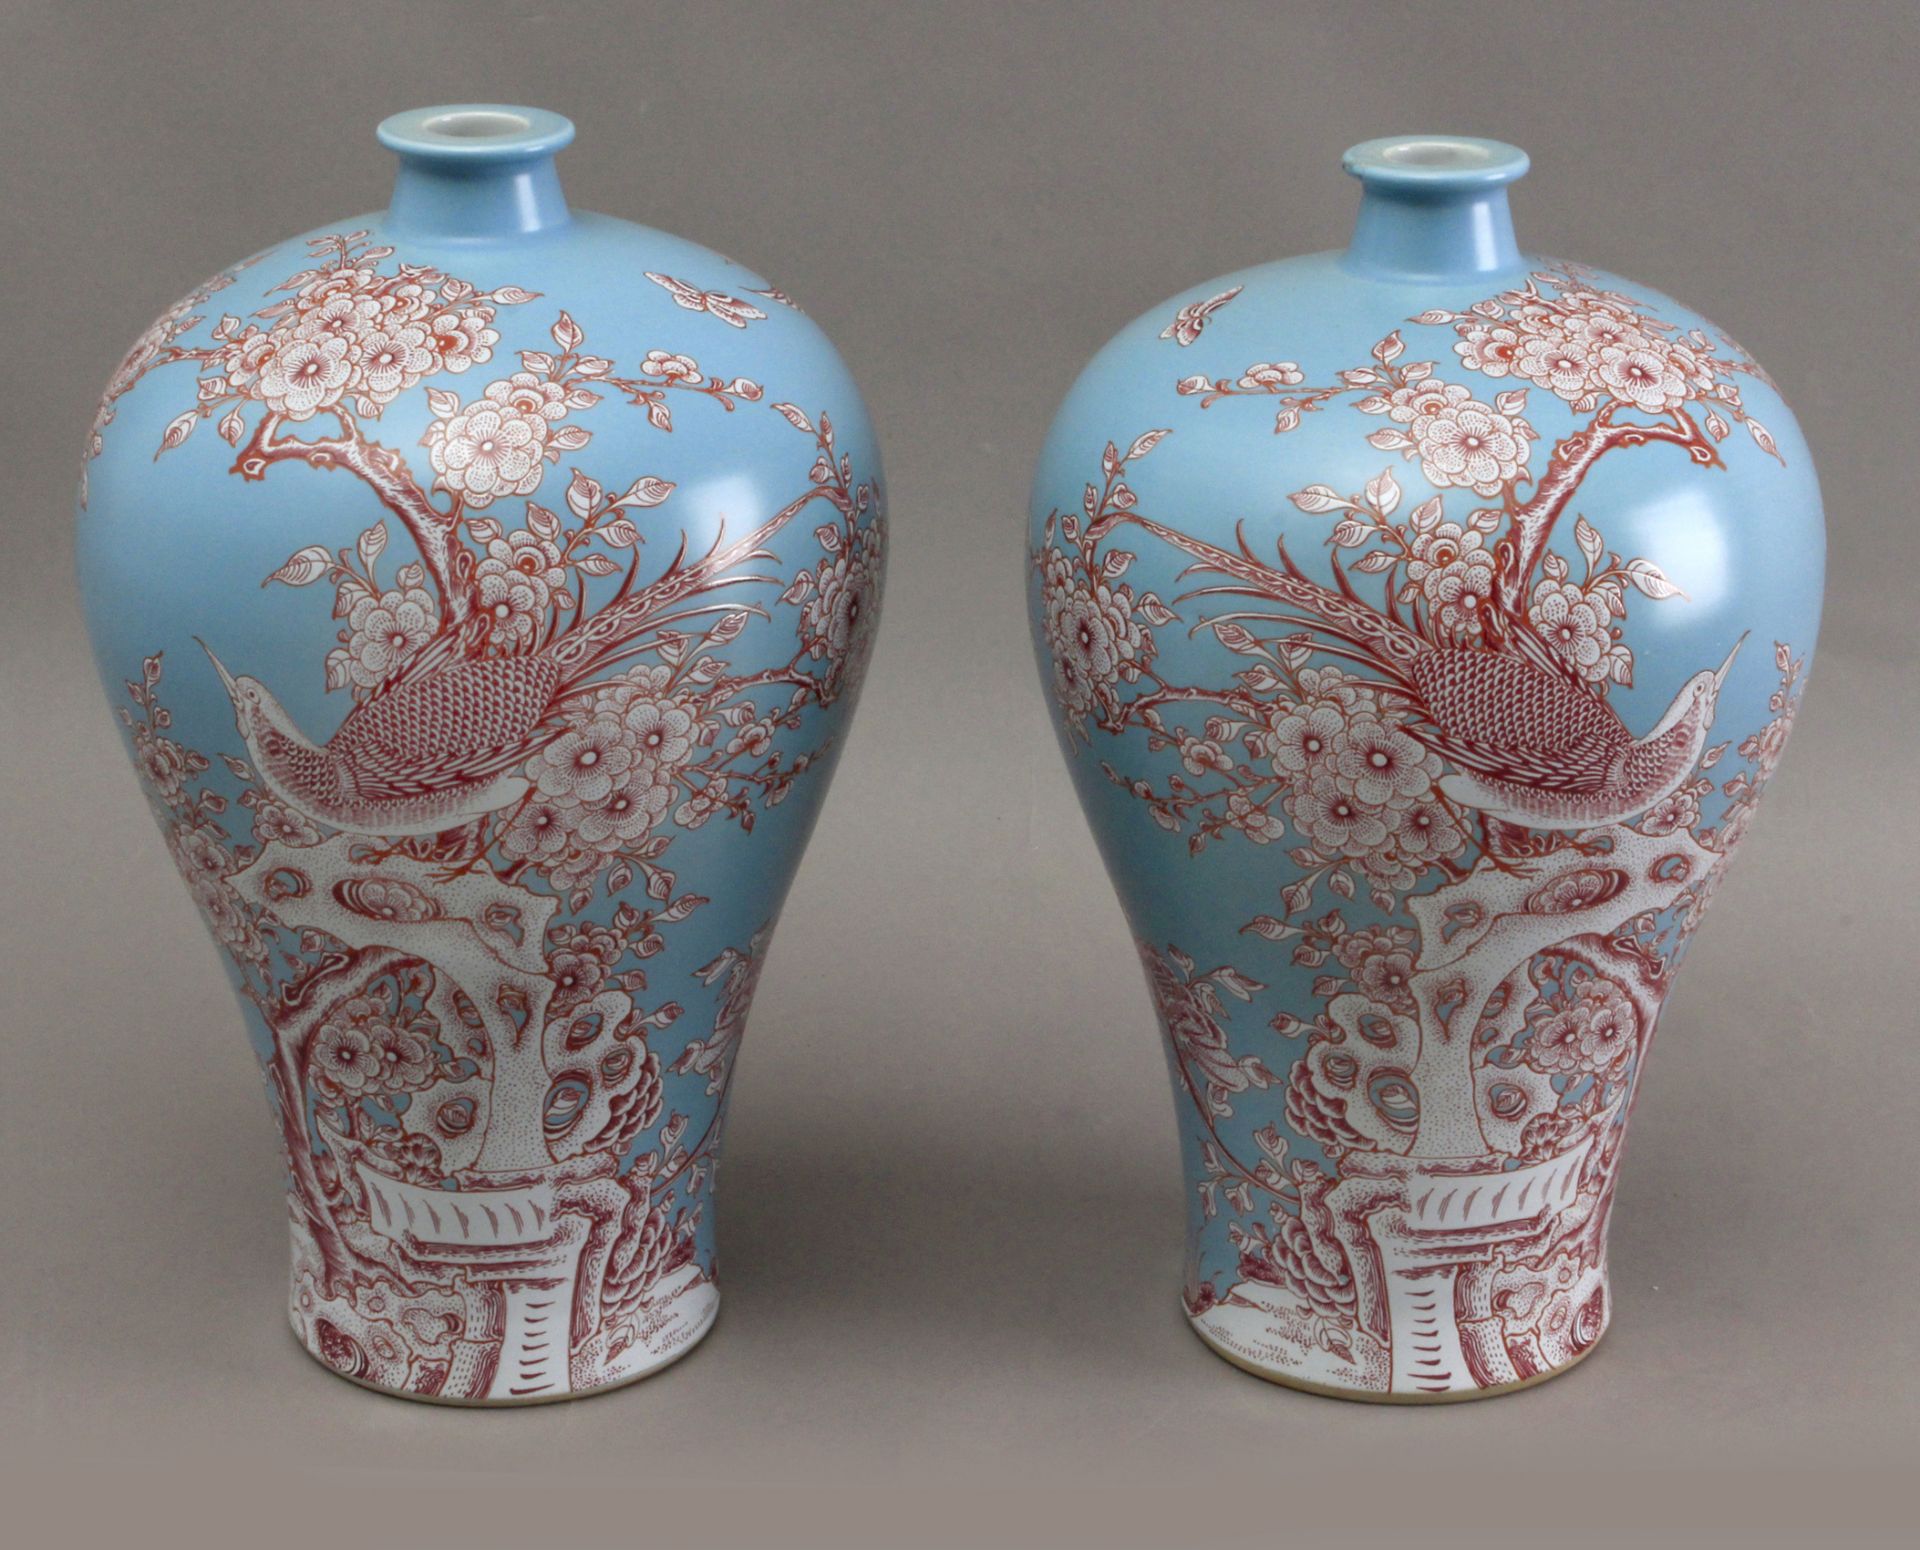 Pair of 20th century Chinese vases in blue monochrome porcelain